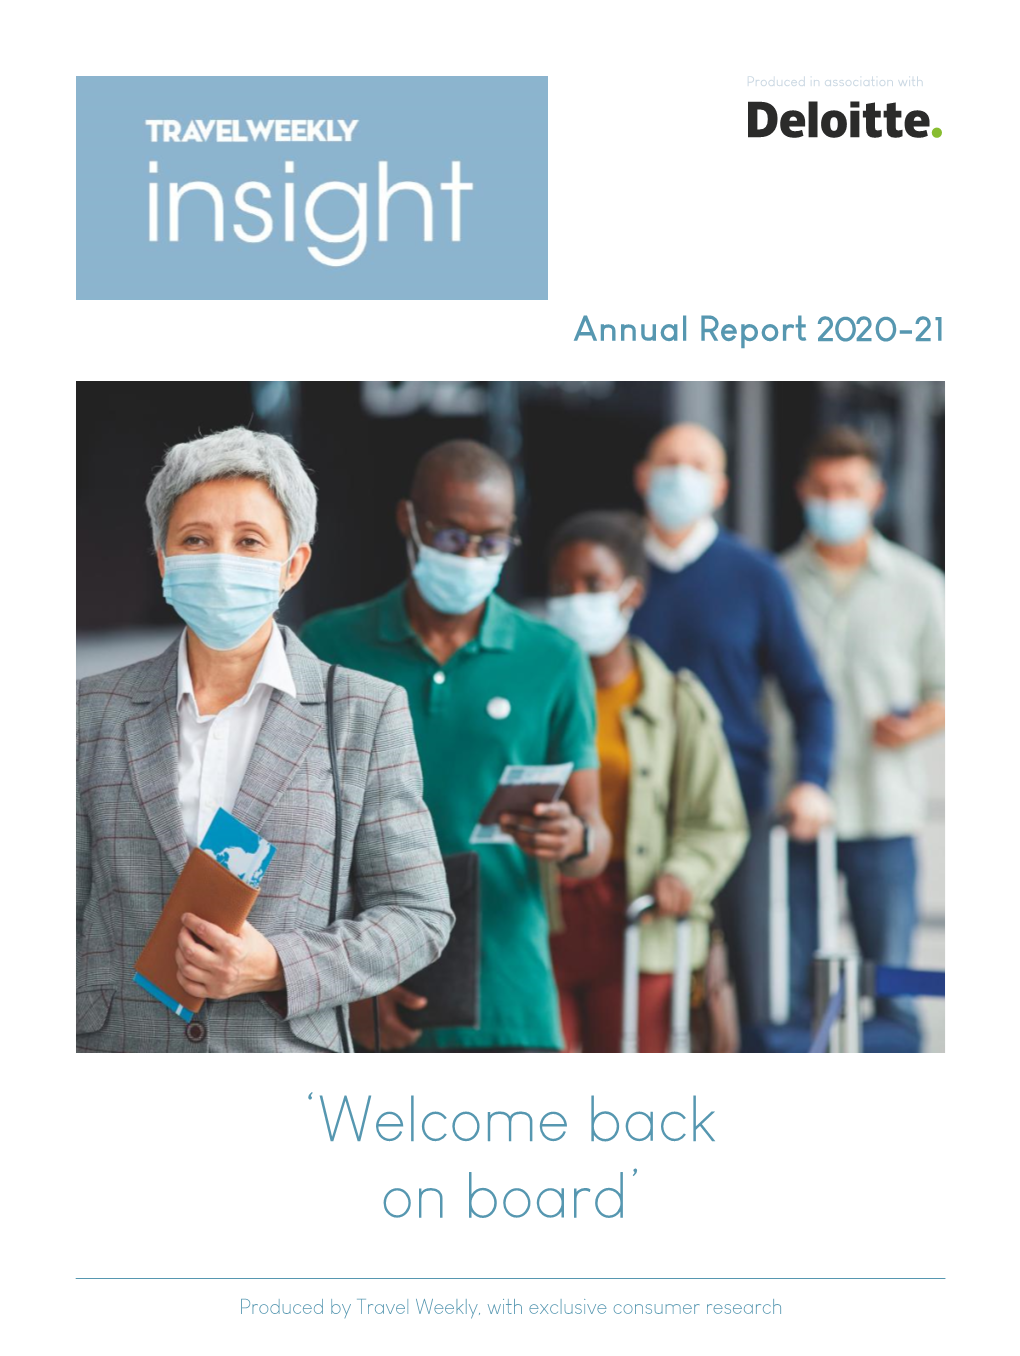 Travel Weekly Insight Annual Report 2020-21 Is Published As a Digital-Only Publication by Travel Weekly Group Limited